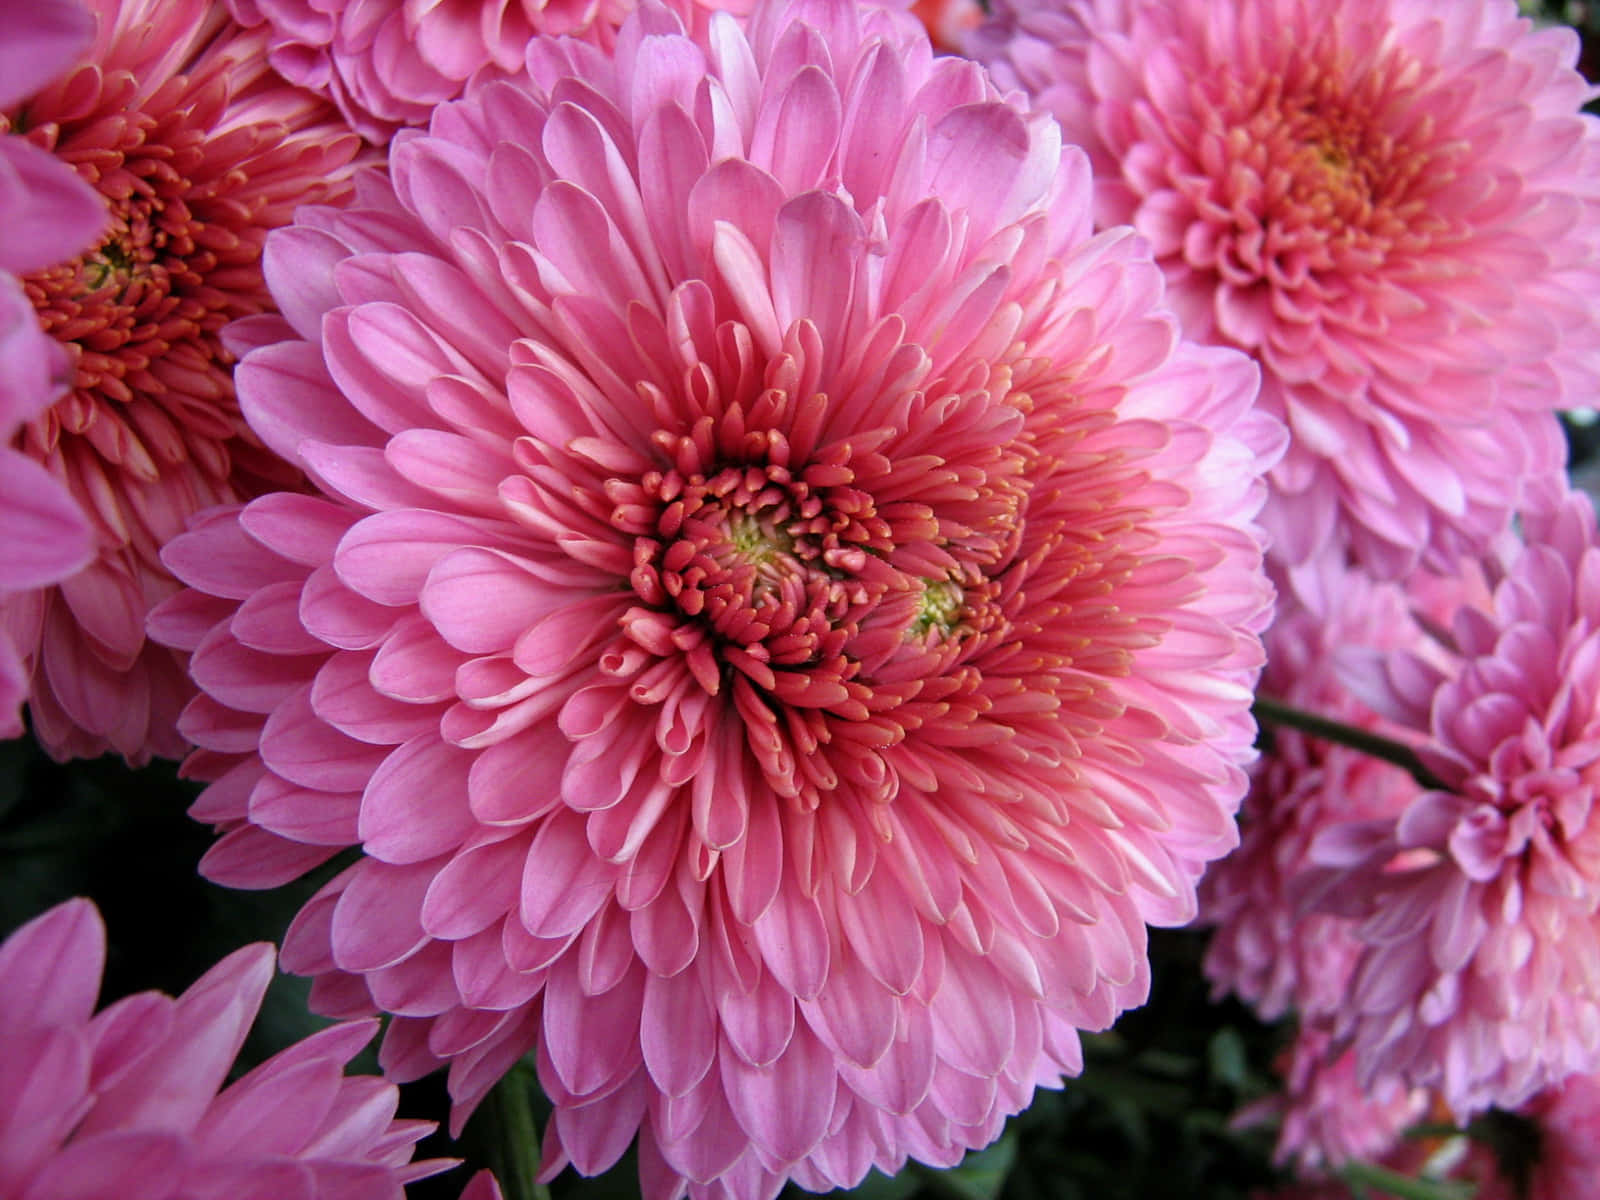 A stunning pink and yellow Chrysanthemum flower in full bloom